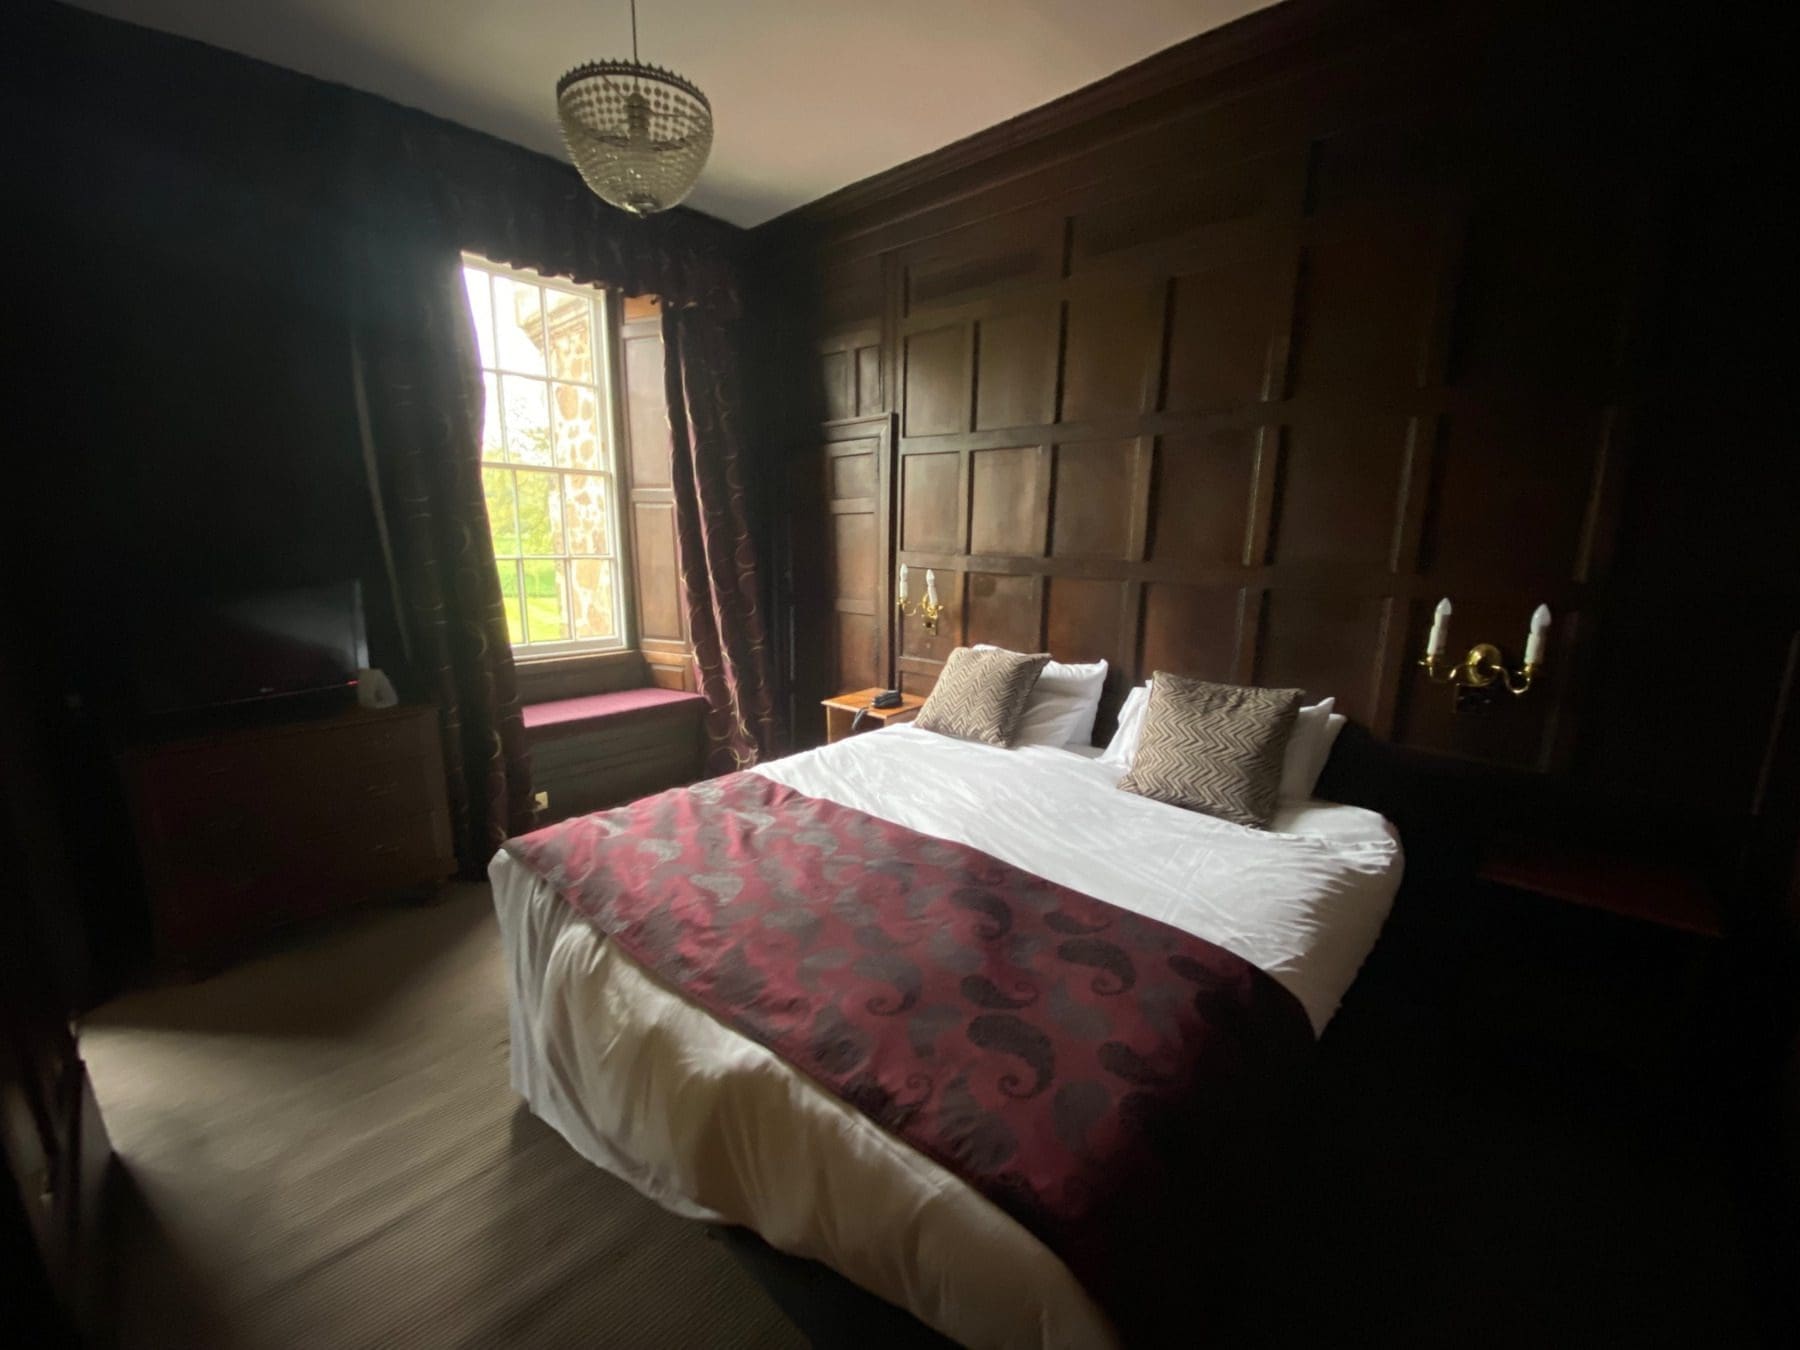 My room at Rothley Court near Leicester